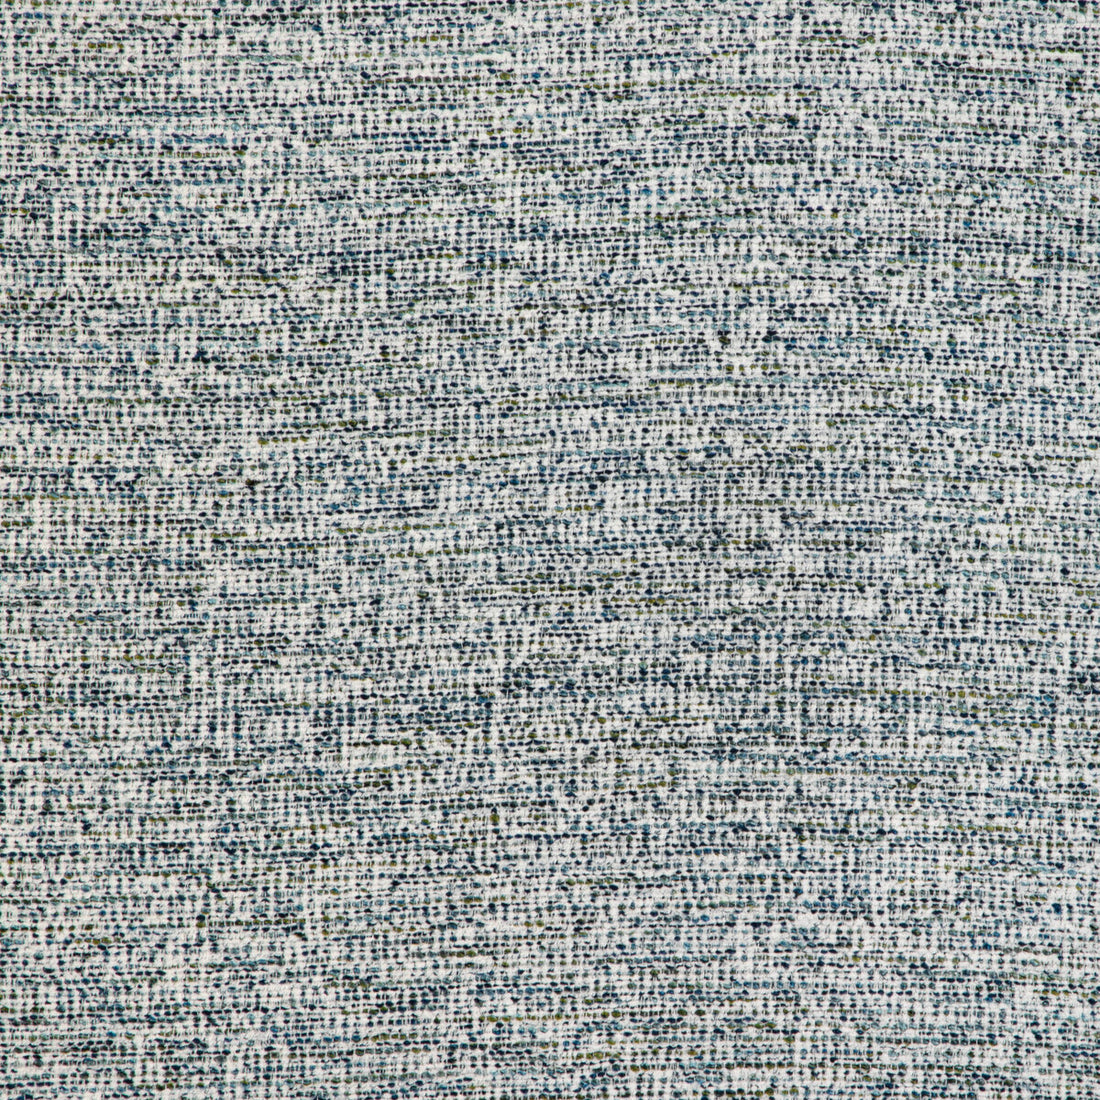 Kravet Design fabric in 36883-315 color - pattern 36883.315.0 - by Kravet Design in the Insideout Seaqual Initiative collection